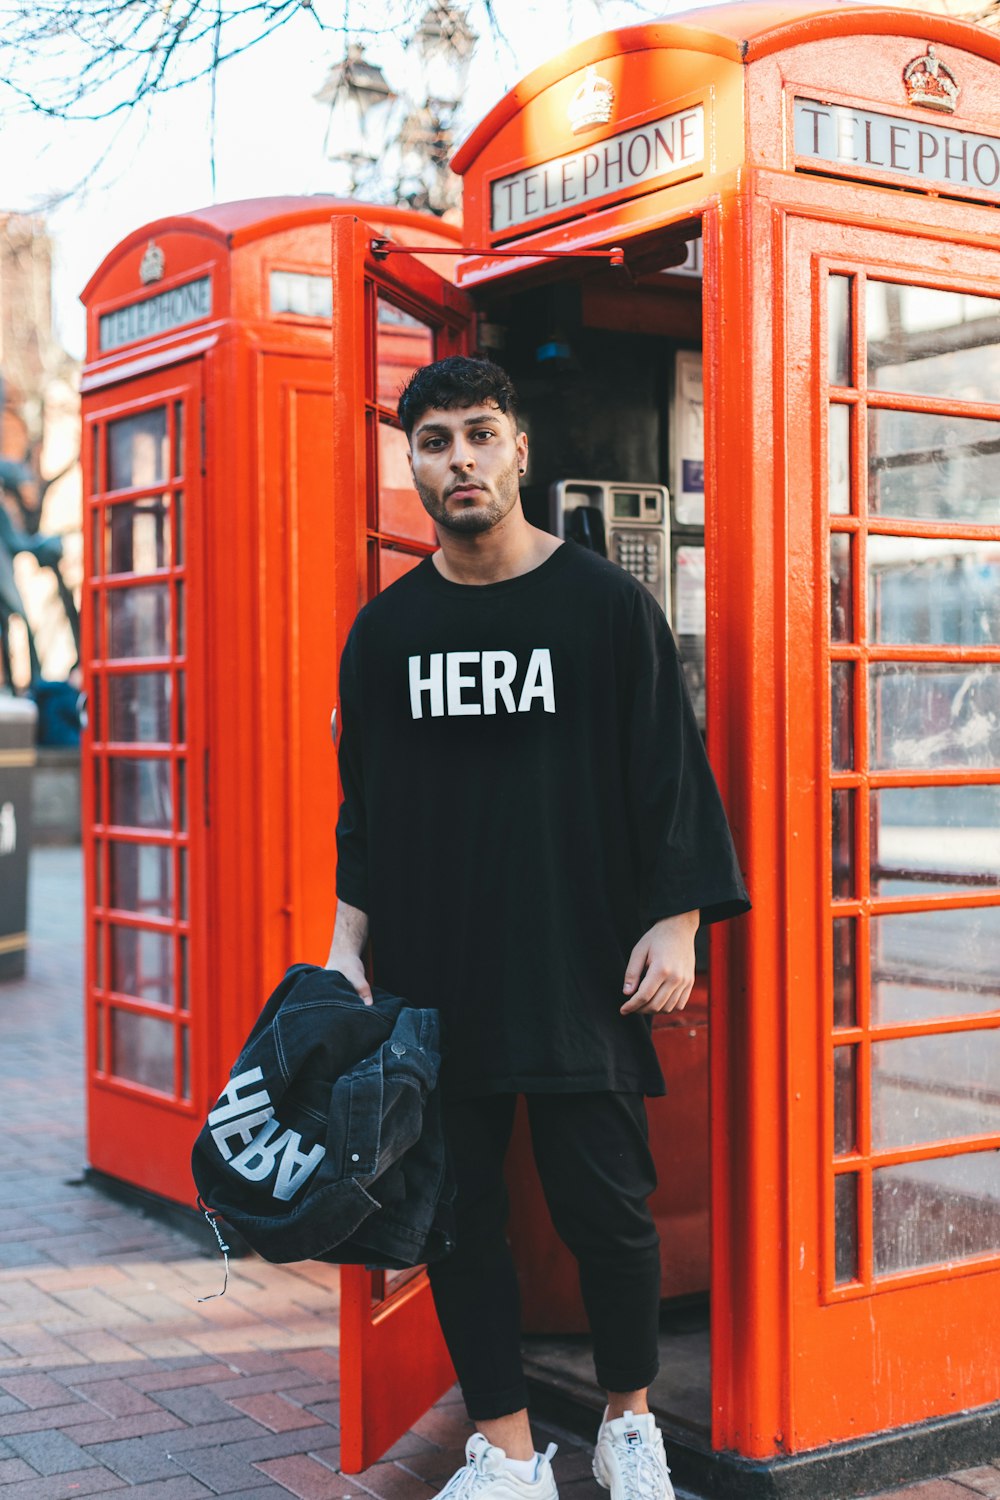 man in black shirt standing near the telephone booth